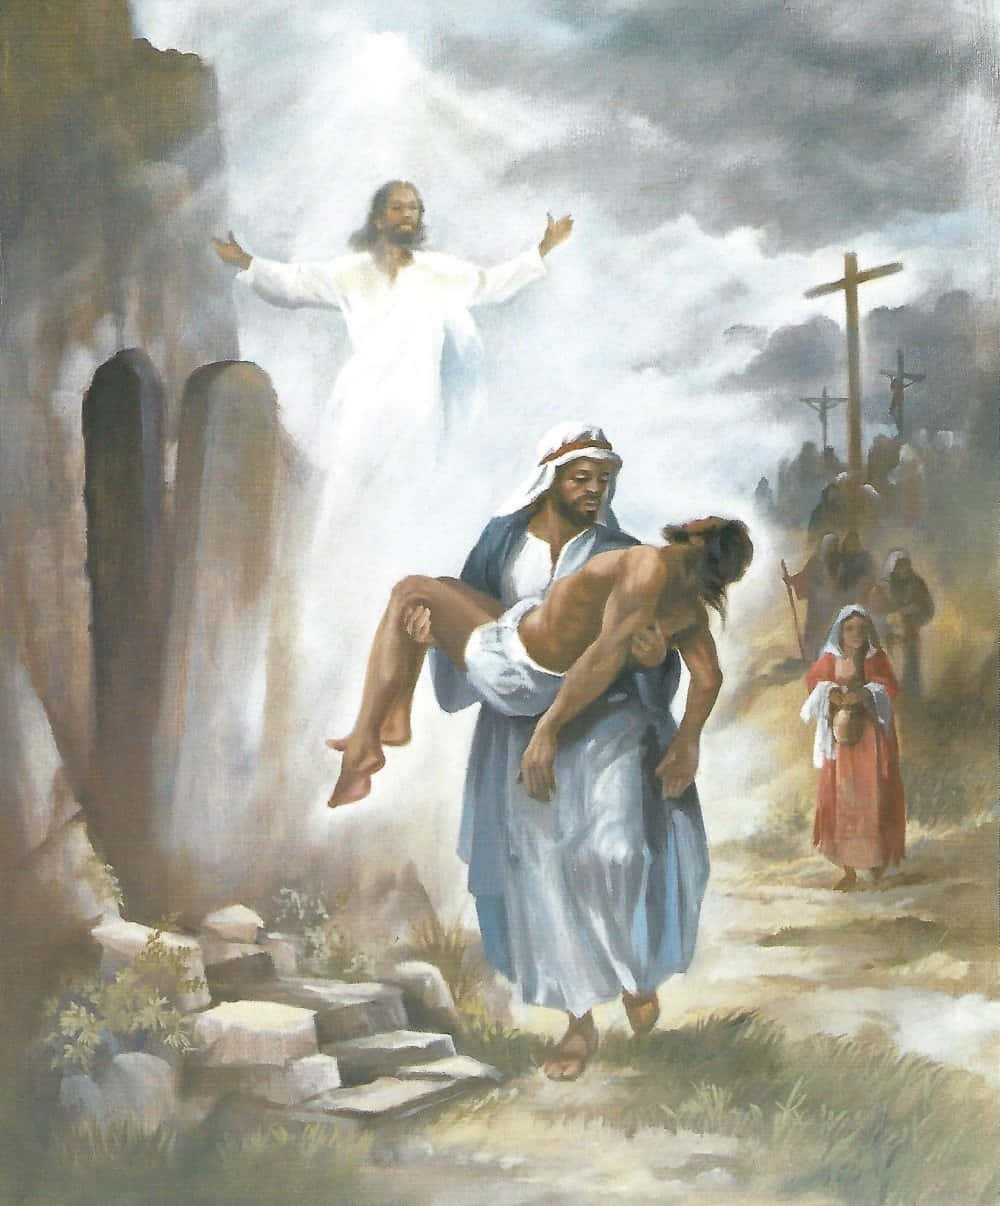 Jesus Christ triumphantly rising from the tomb on Resurrection Sunday Wallpaper